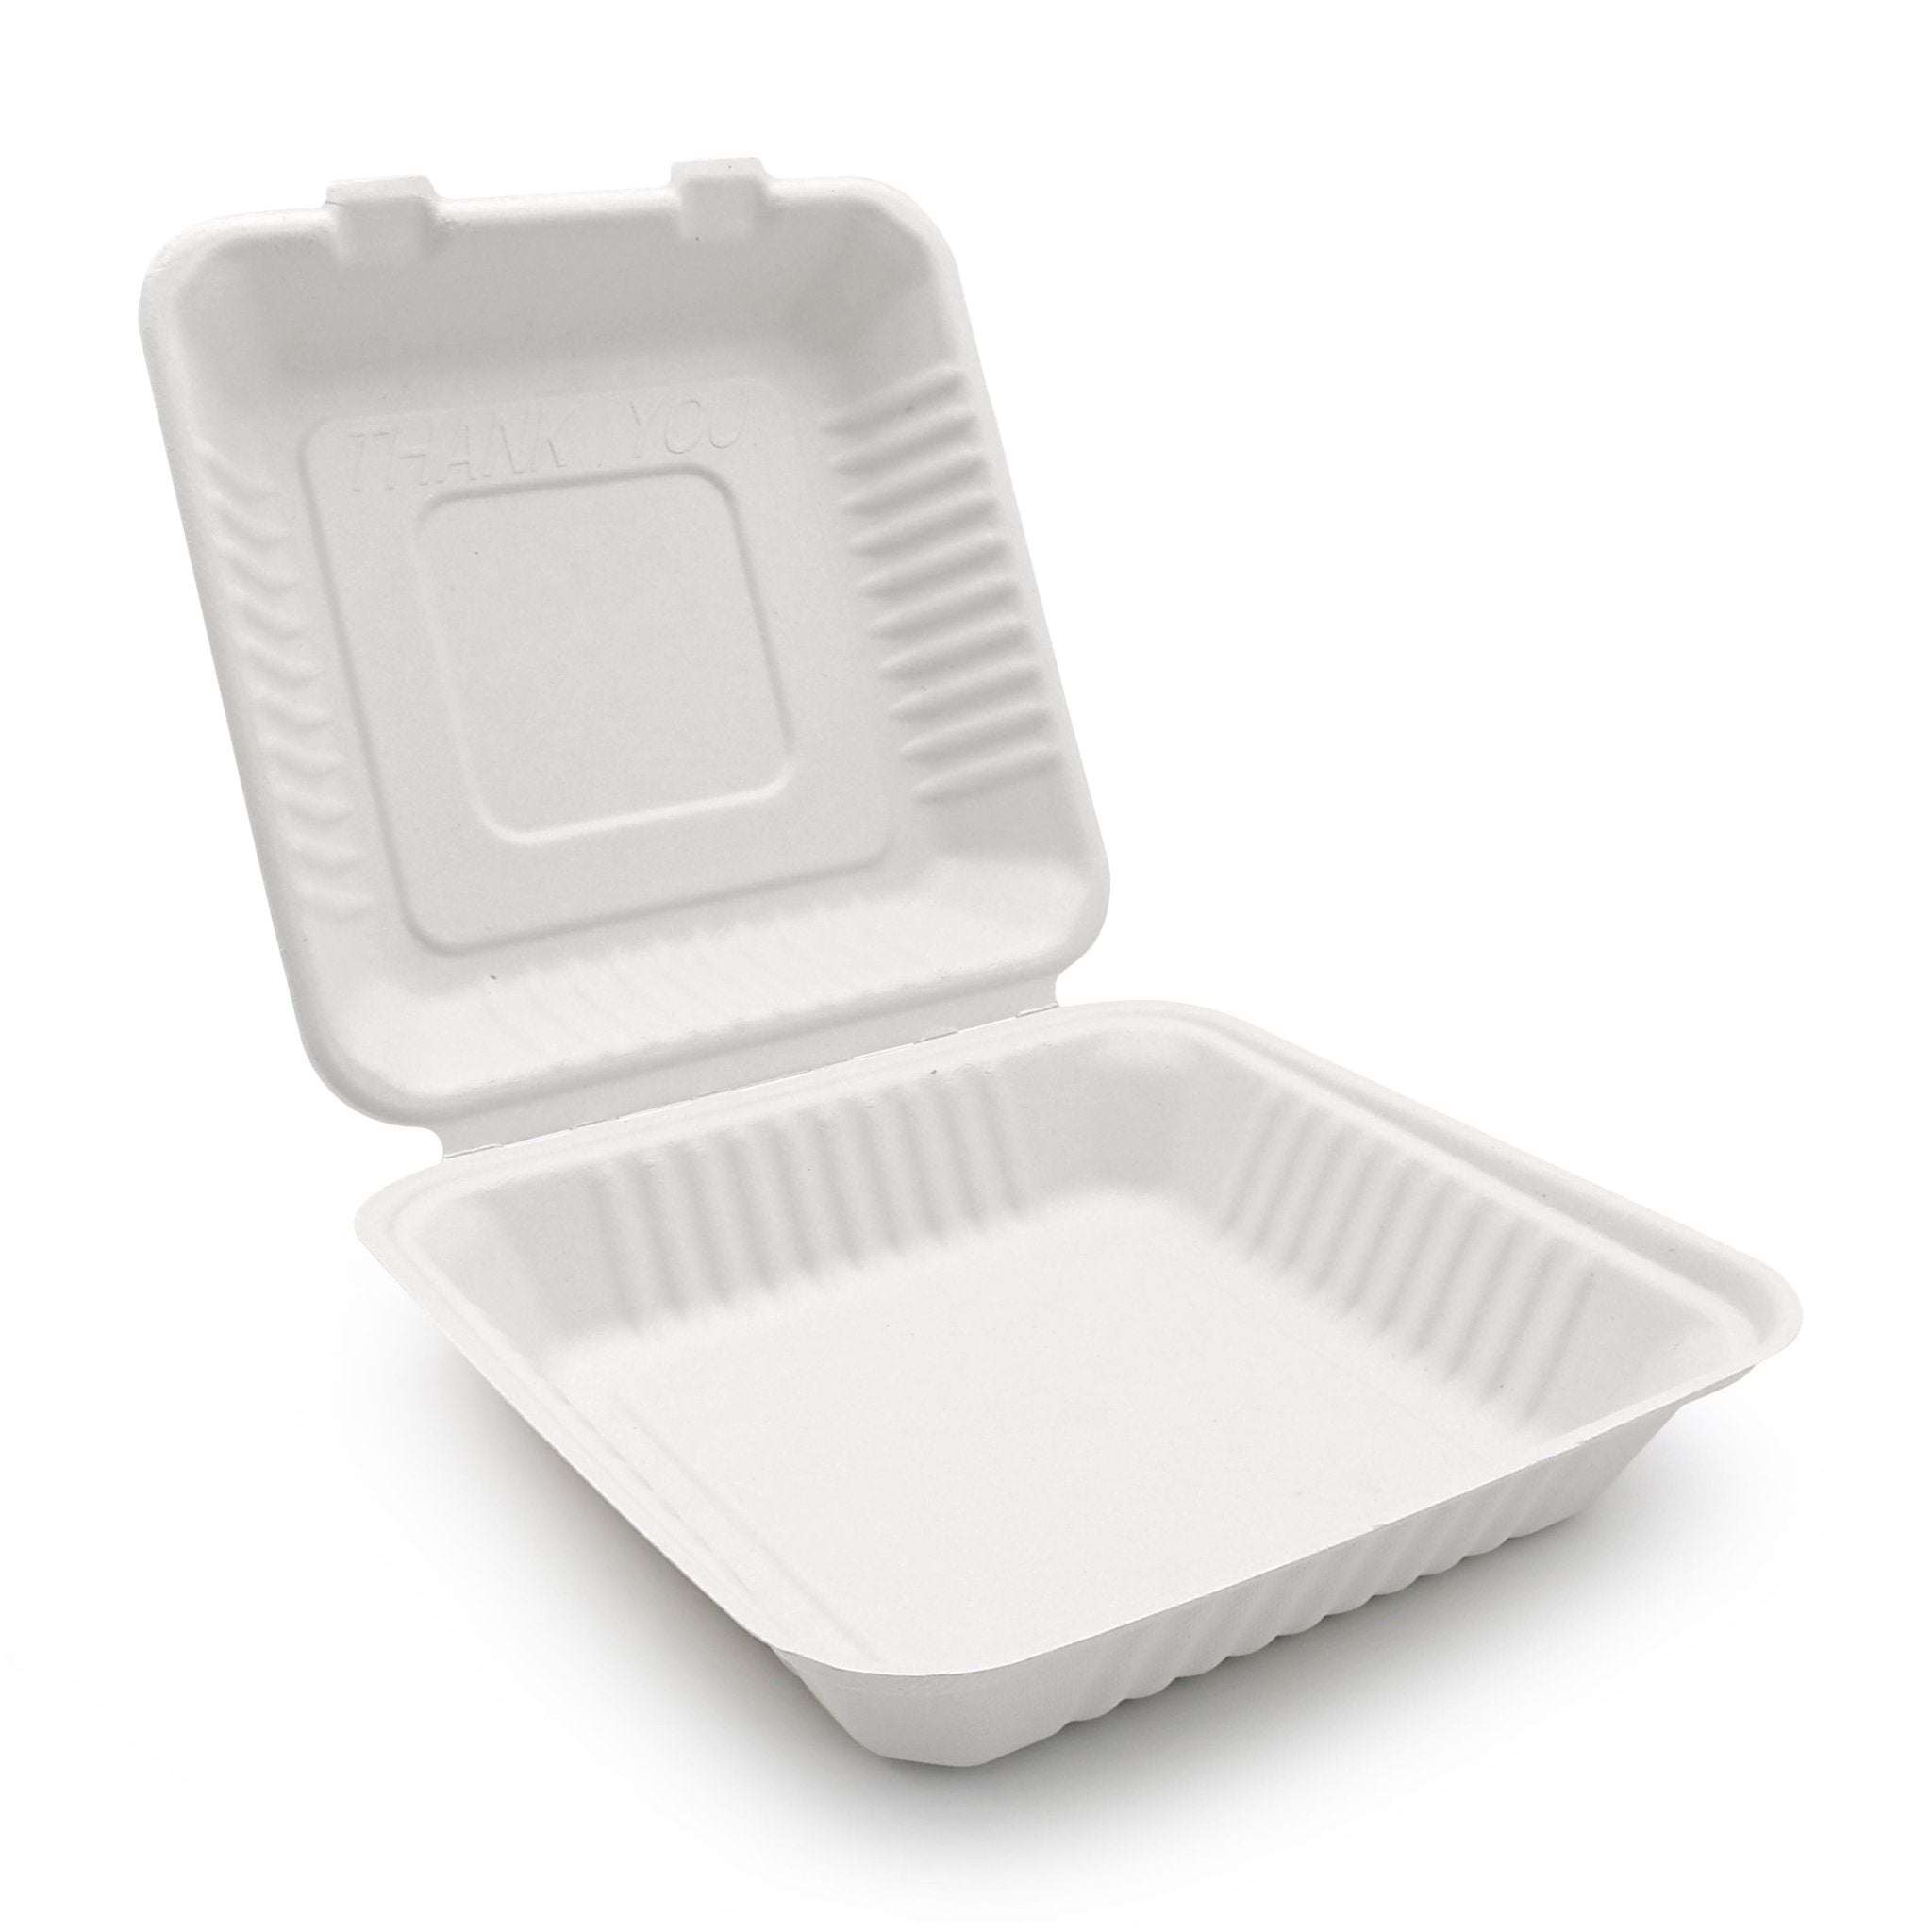 Bagasse Hinged Container, White, PFAS FREE, 8" x 8", 200pc - Feast Source